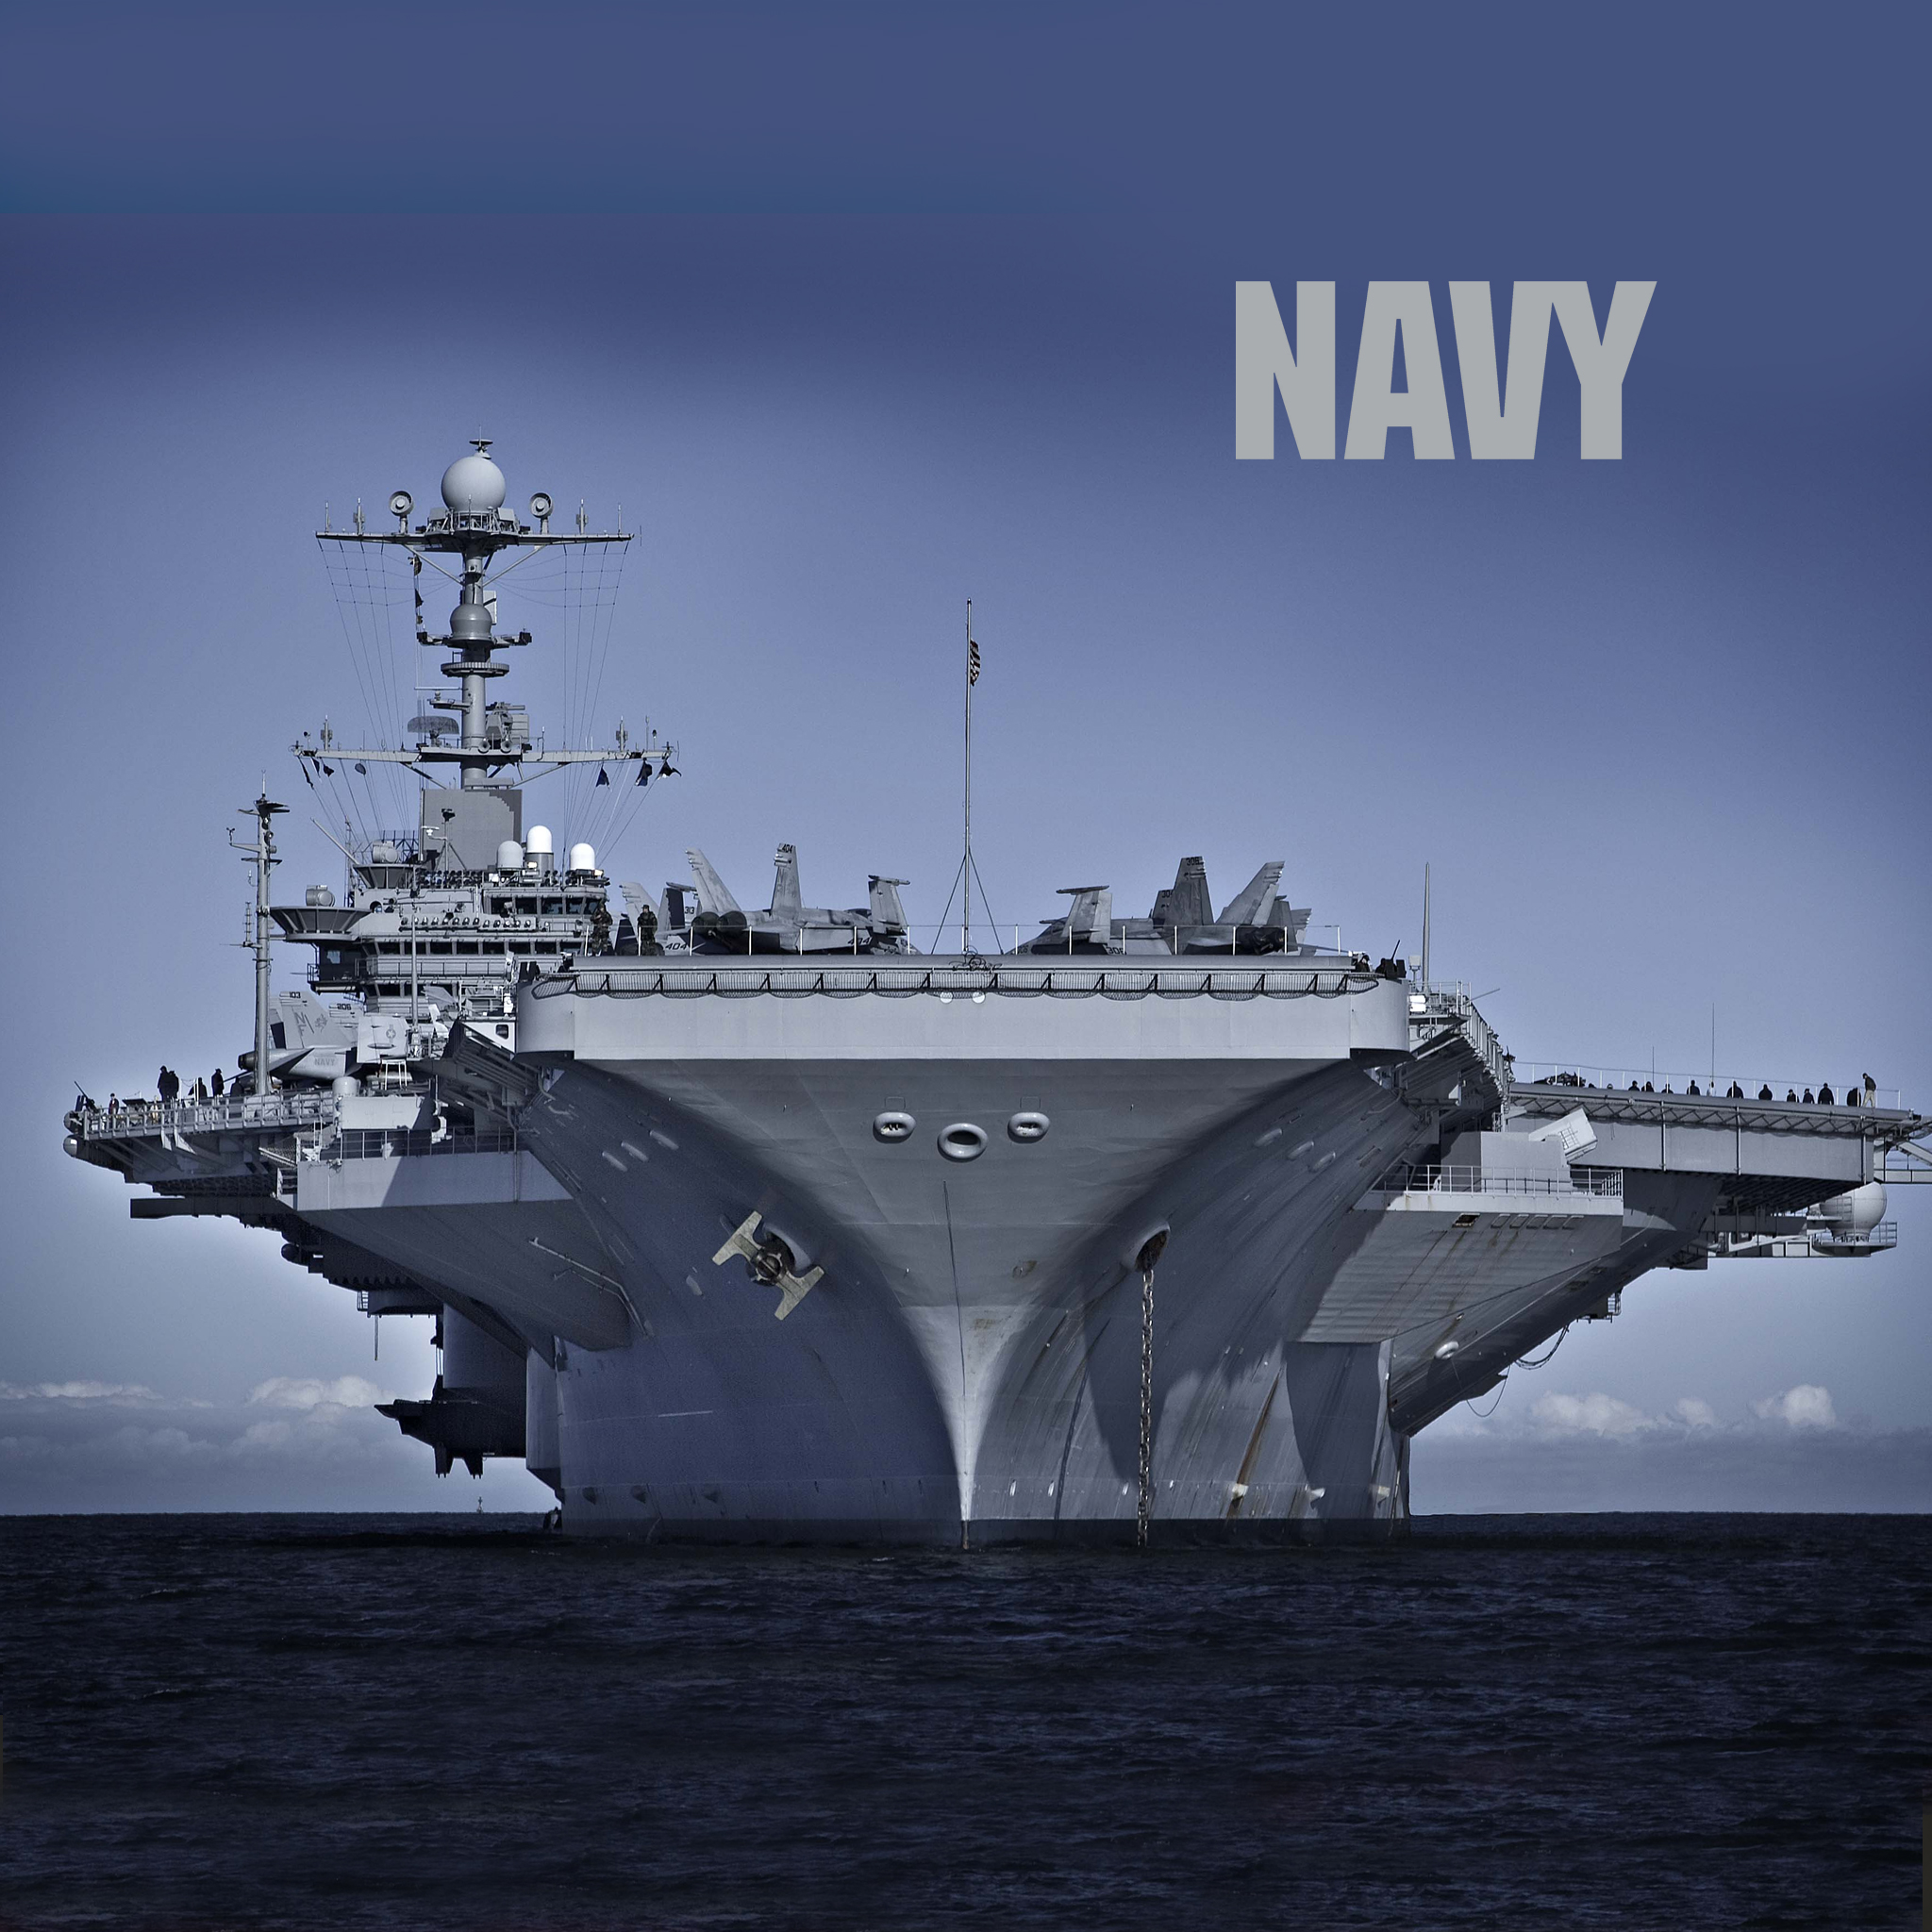 US Navy Wallpaper for your New iPad with Retina Display